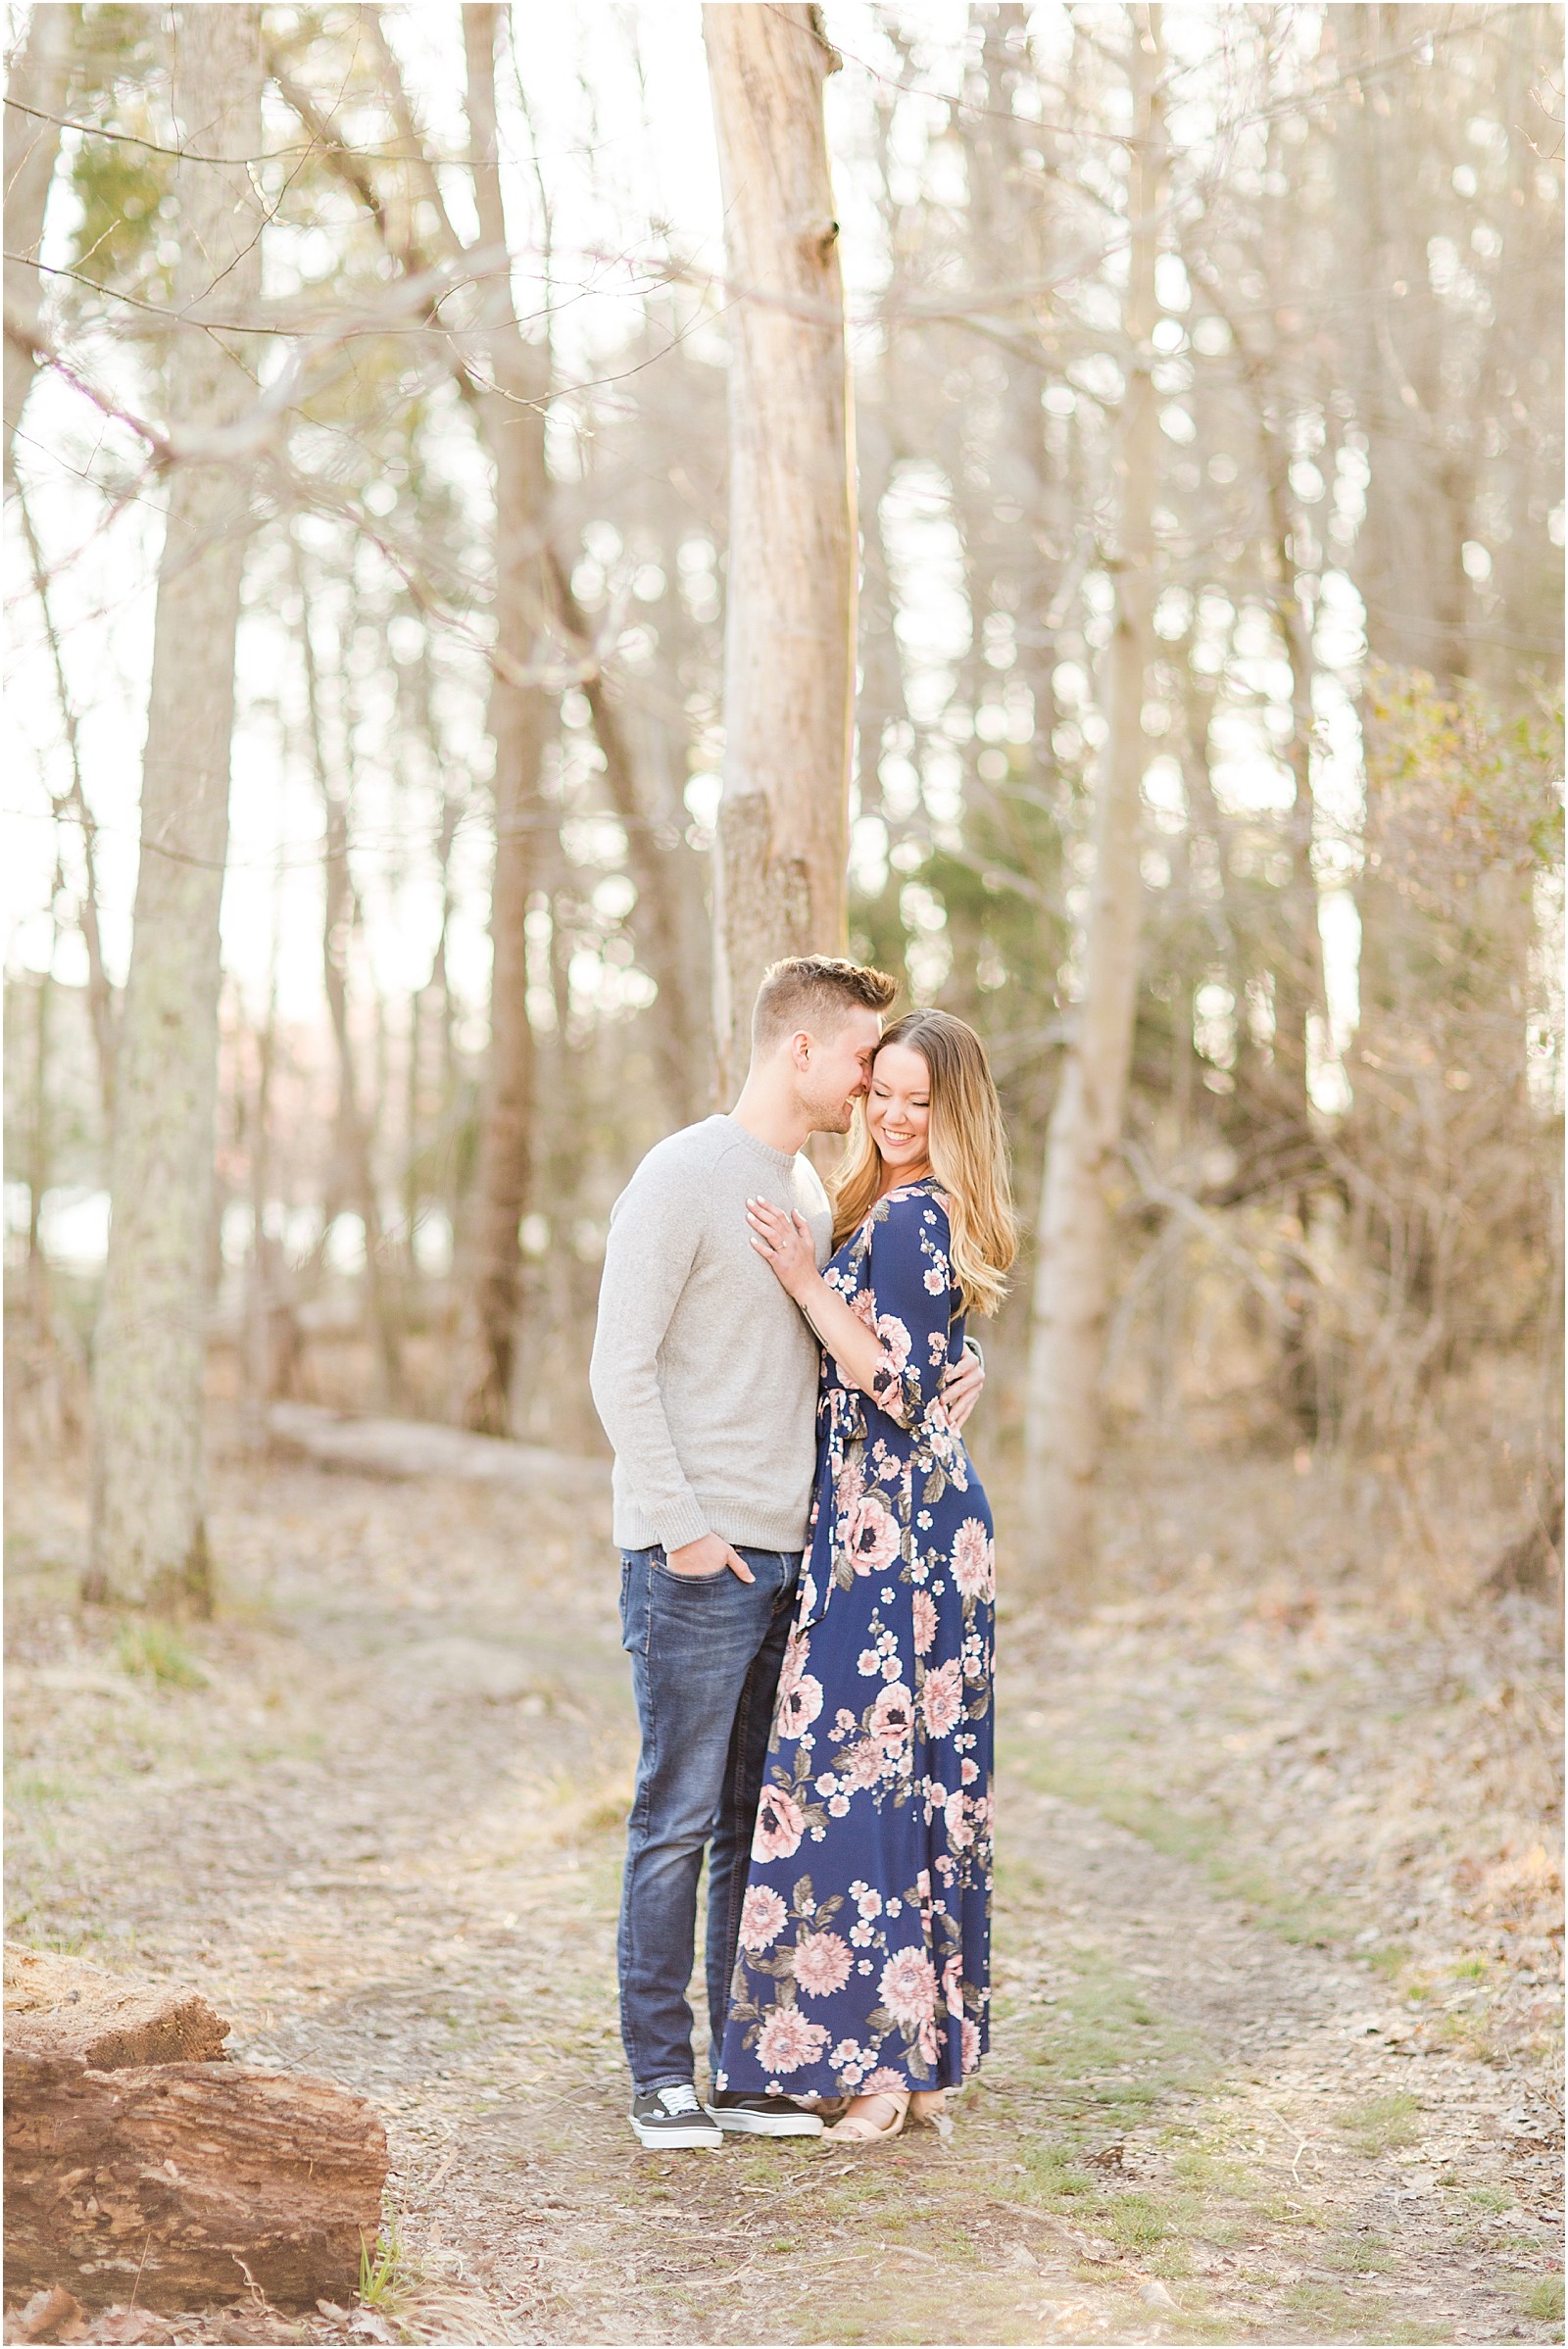 Rachel and Nick | Lincoln State Park Engagement Session 011.jpg